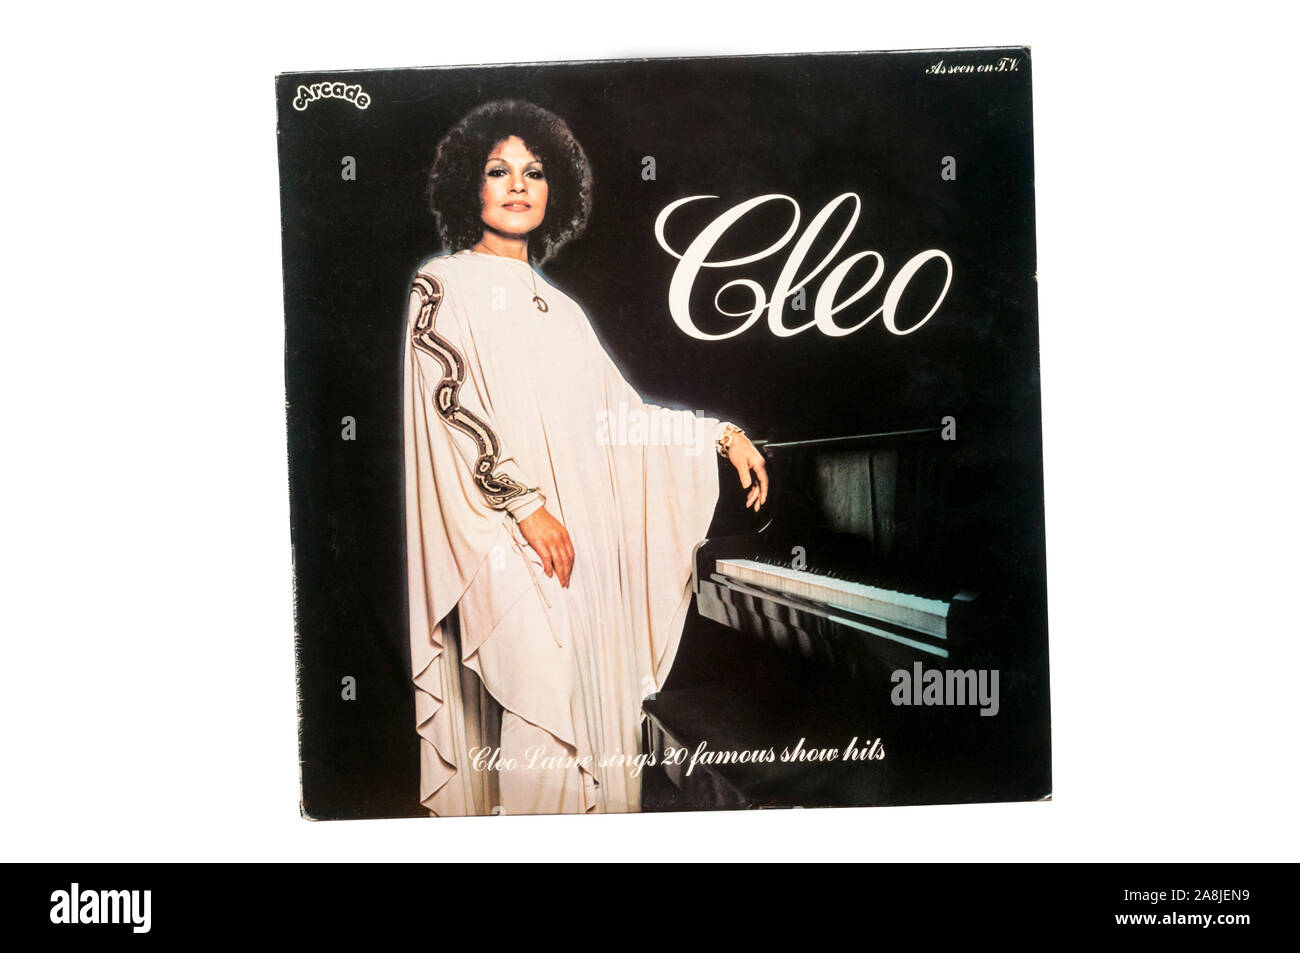 Cleo.  Cleo Laine Sings 20 Famous Show Hits.  Released in 1978. Stock Photo